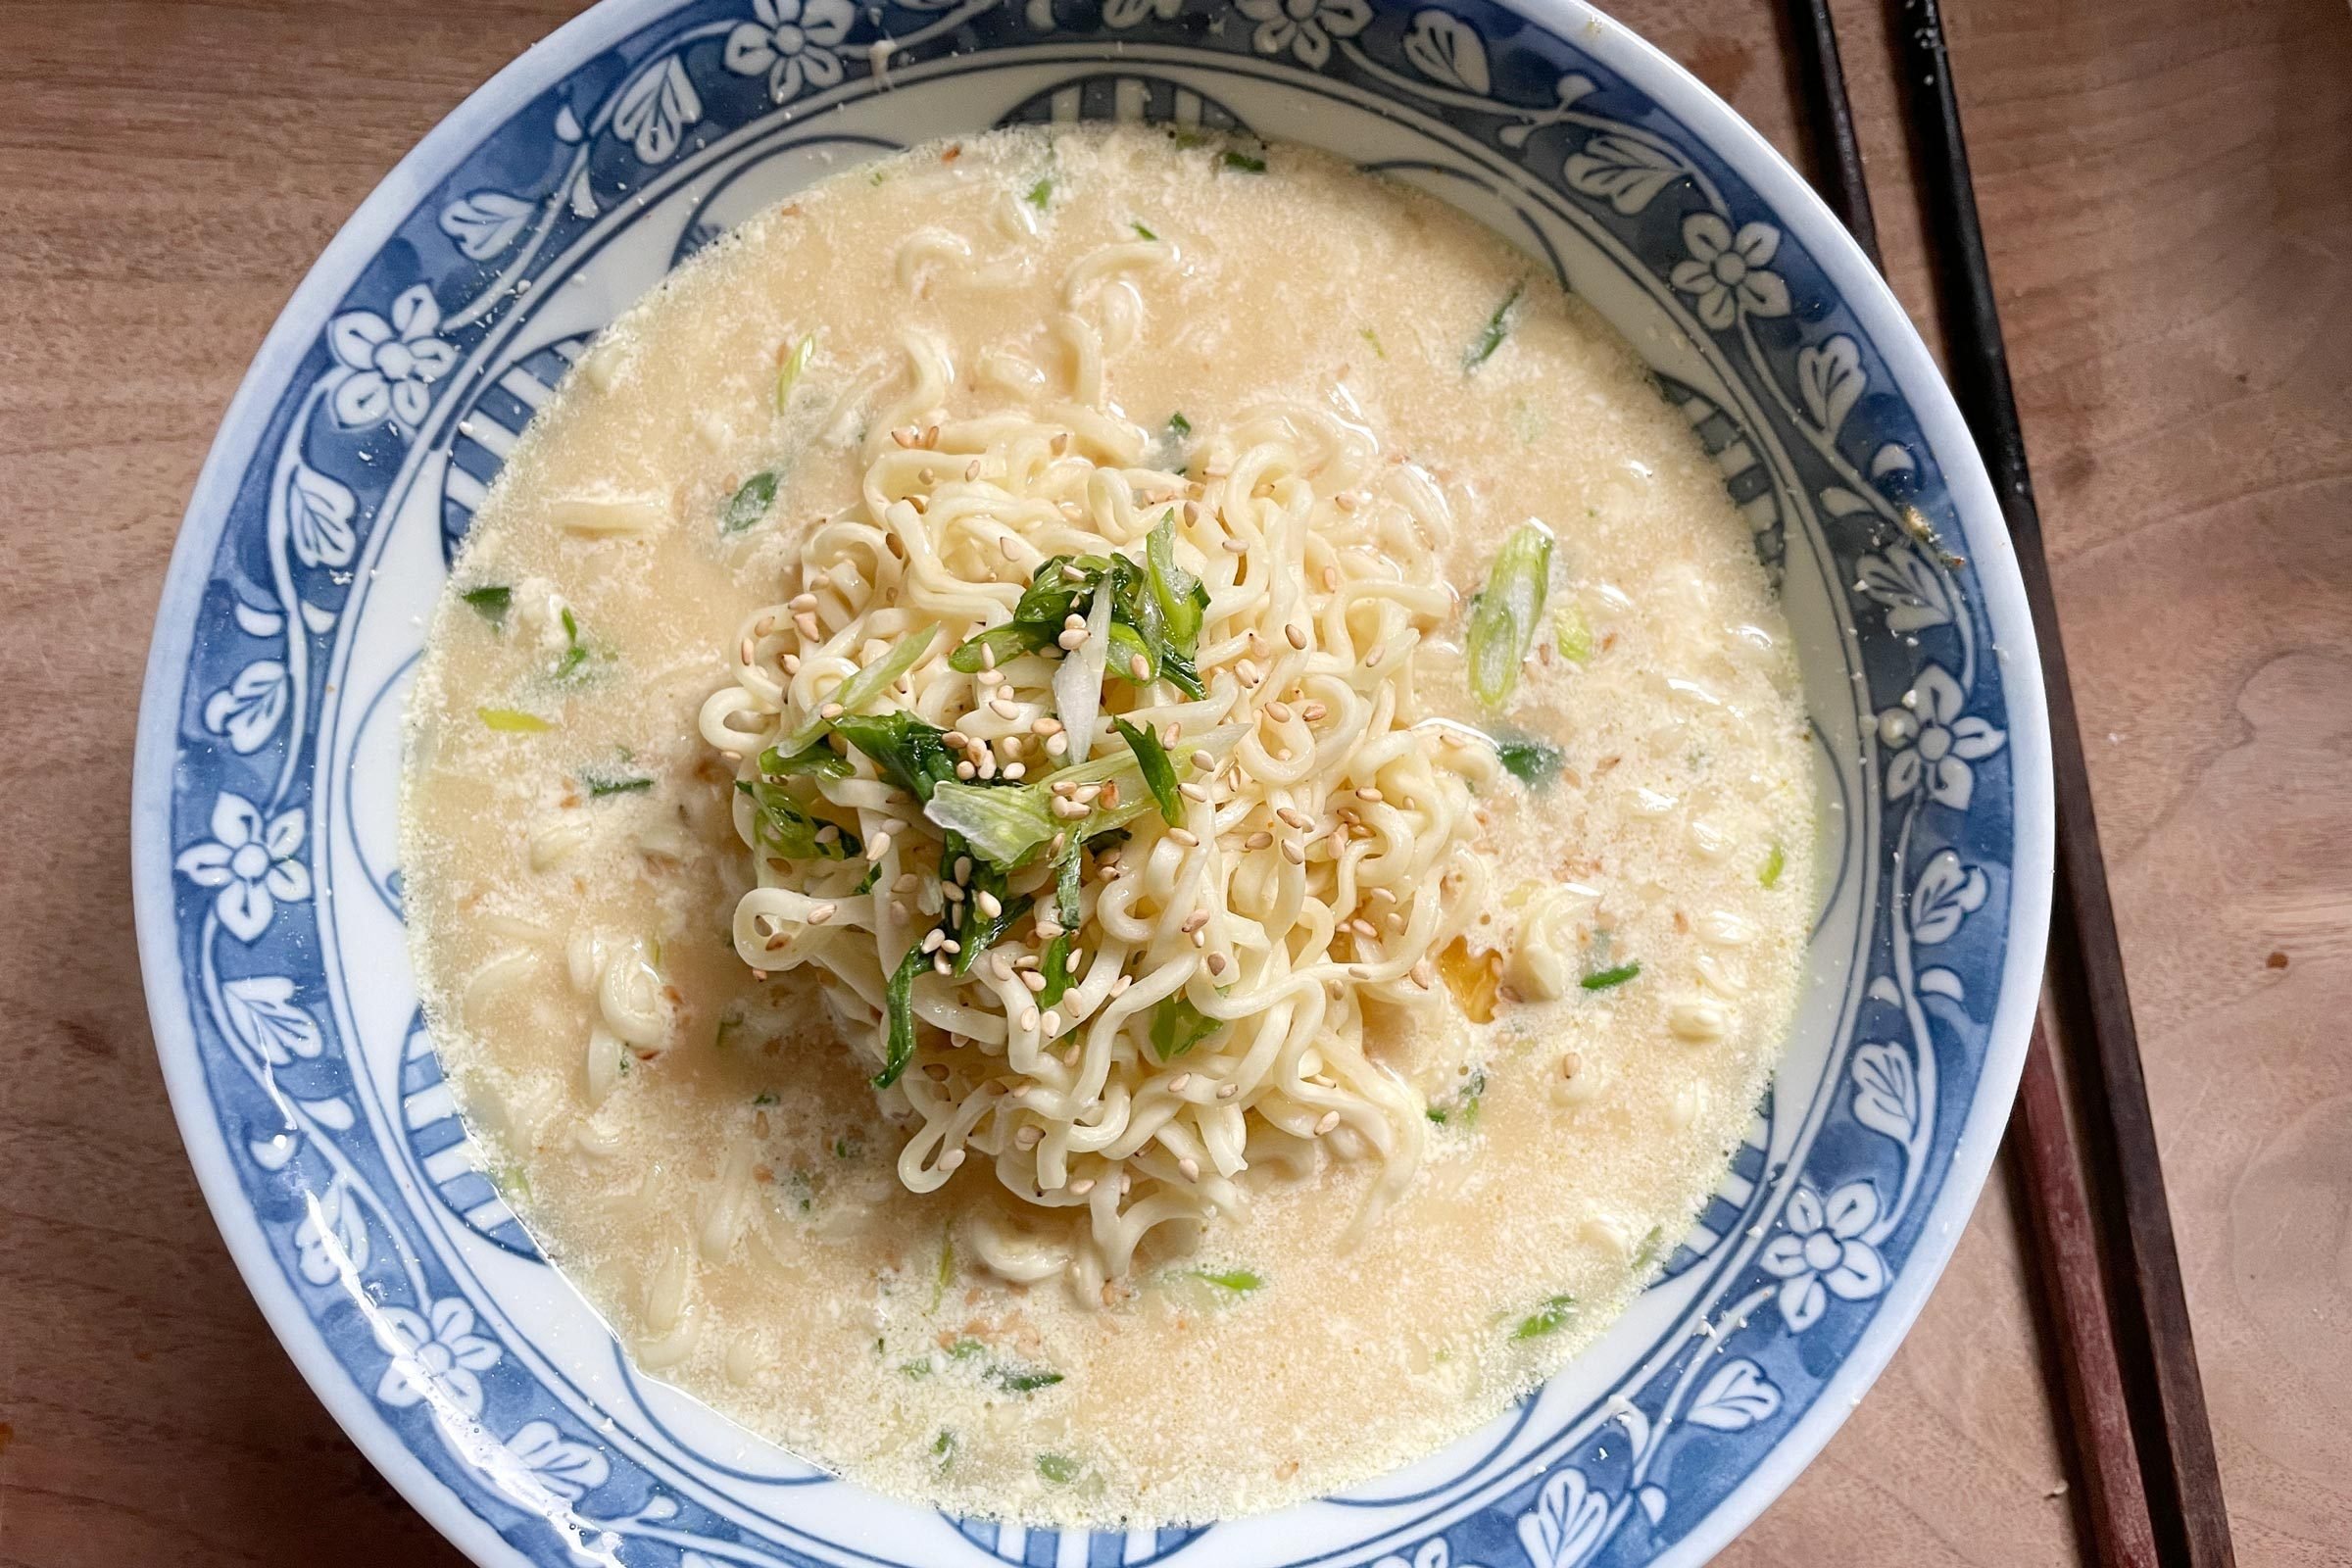 How to properly prepare ramen soup at home - a step-by-step recipe